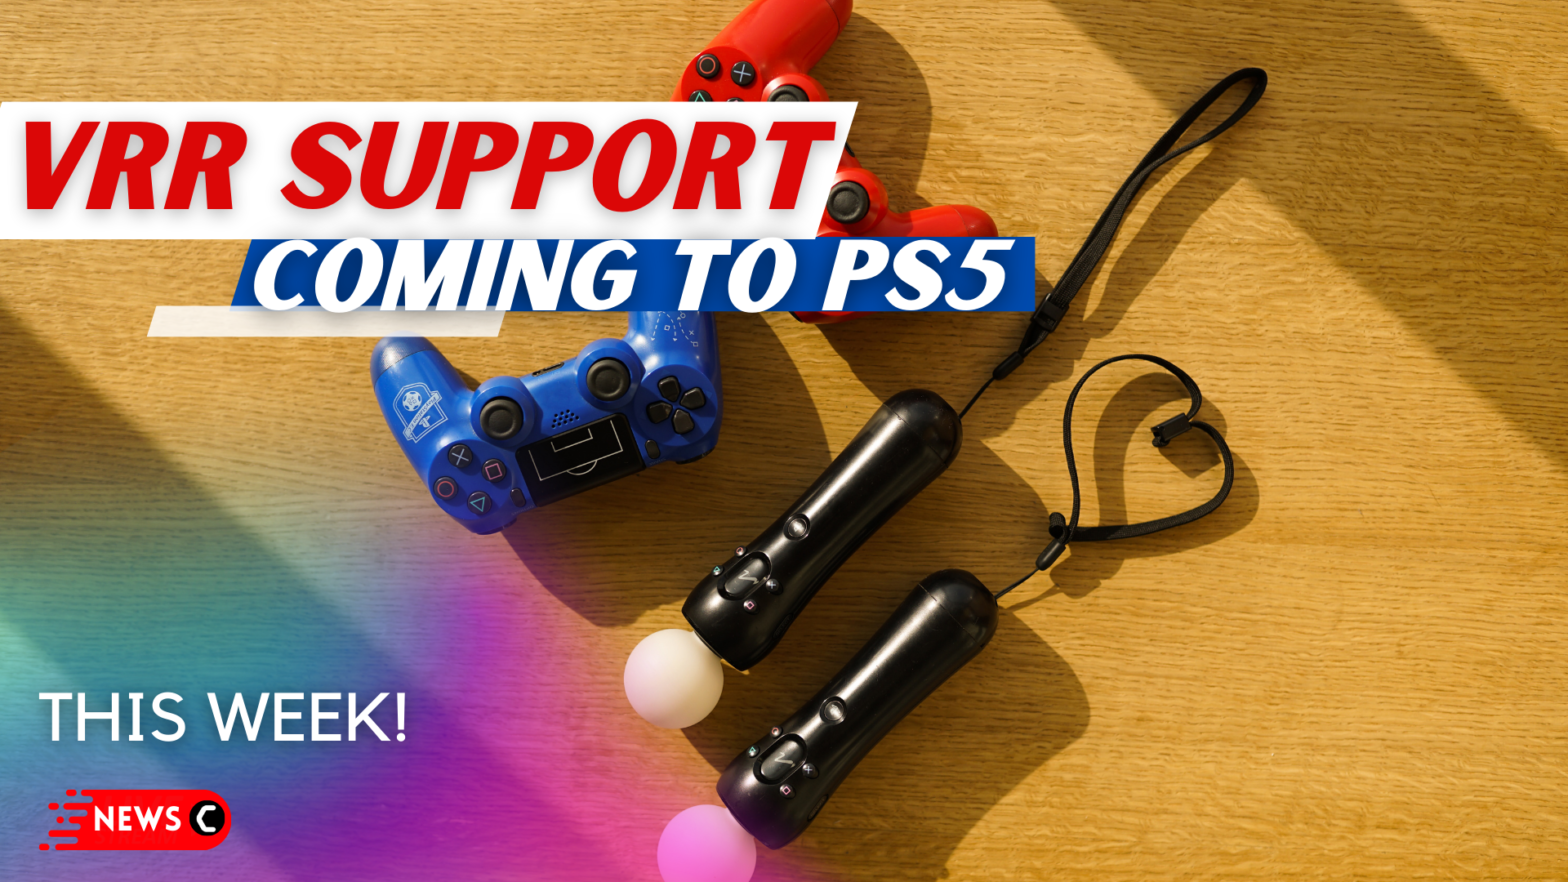 VRR Support Coming to PS5 This Week Globally